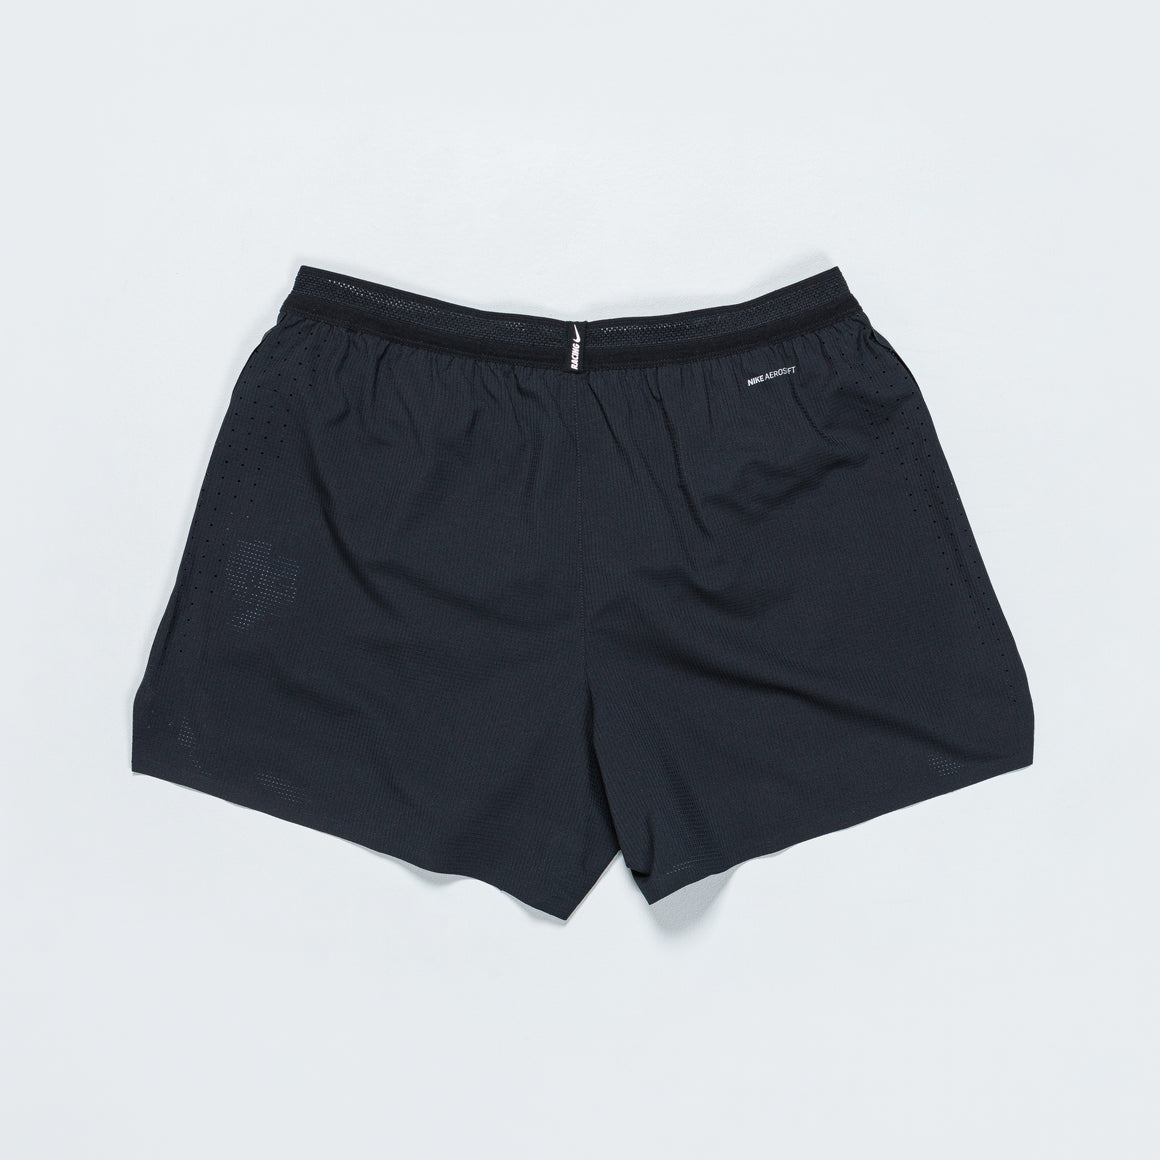 AeroSwift 4In Short - Black/White | Up There Athletics